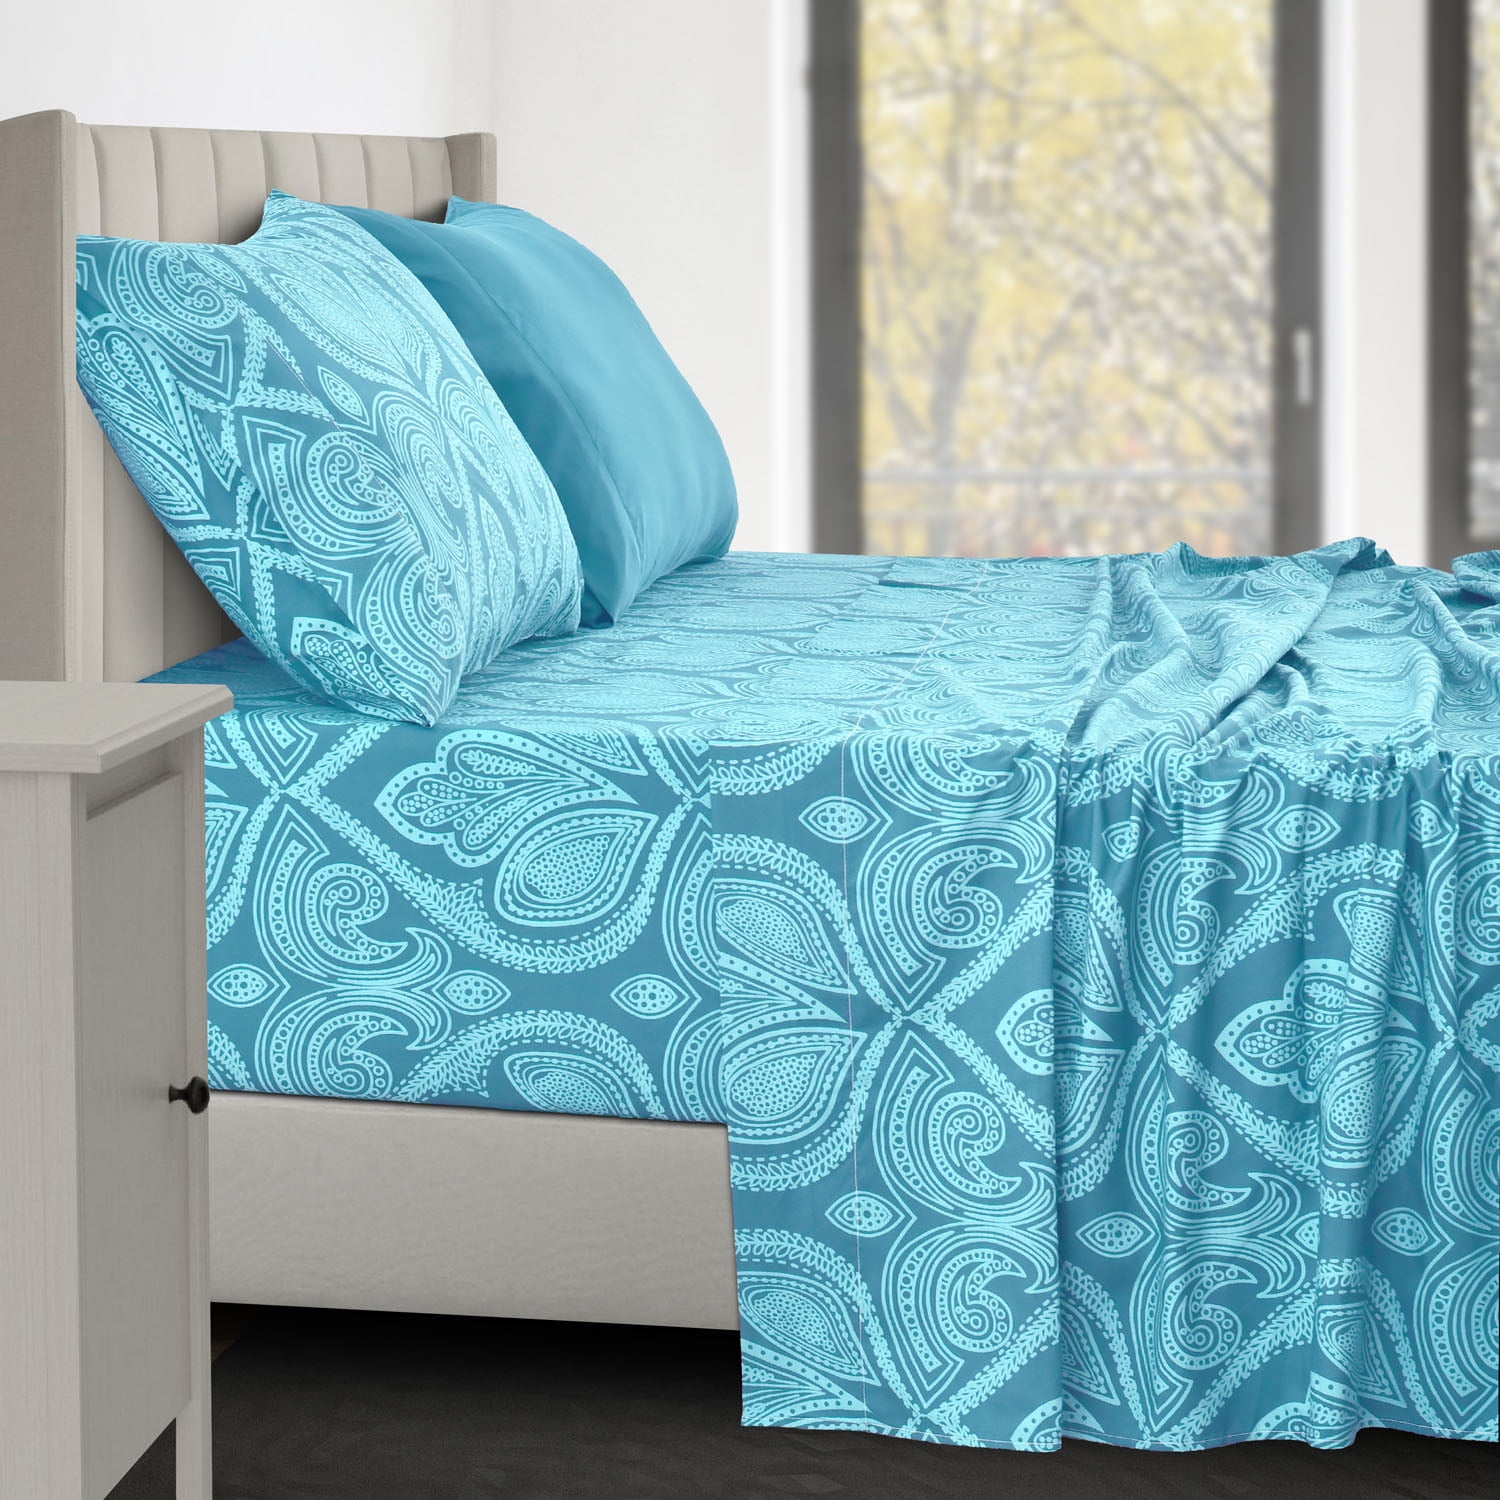 Details about   New Turquoise Twin Flat Top Sheet Basic Choice 2 Piece Solid Color 